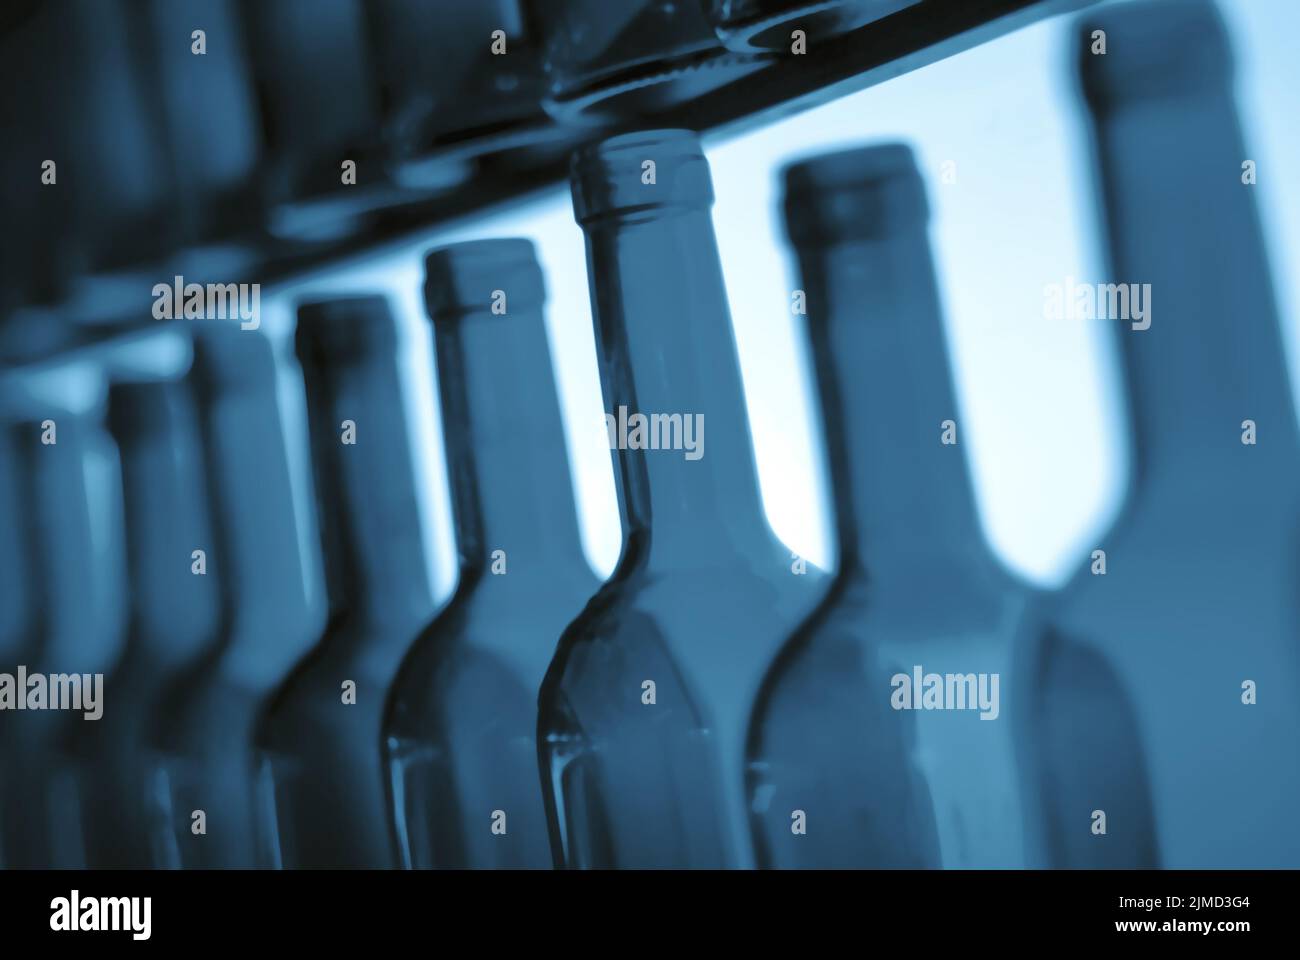 Empty wine bottle necks in a row as illustration of binge or problem drinking and depression caused Stock Photo